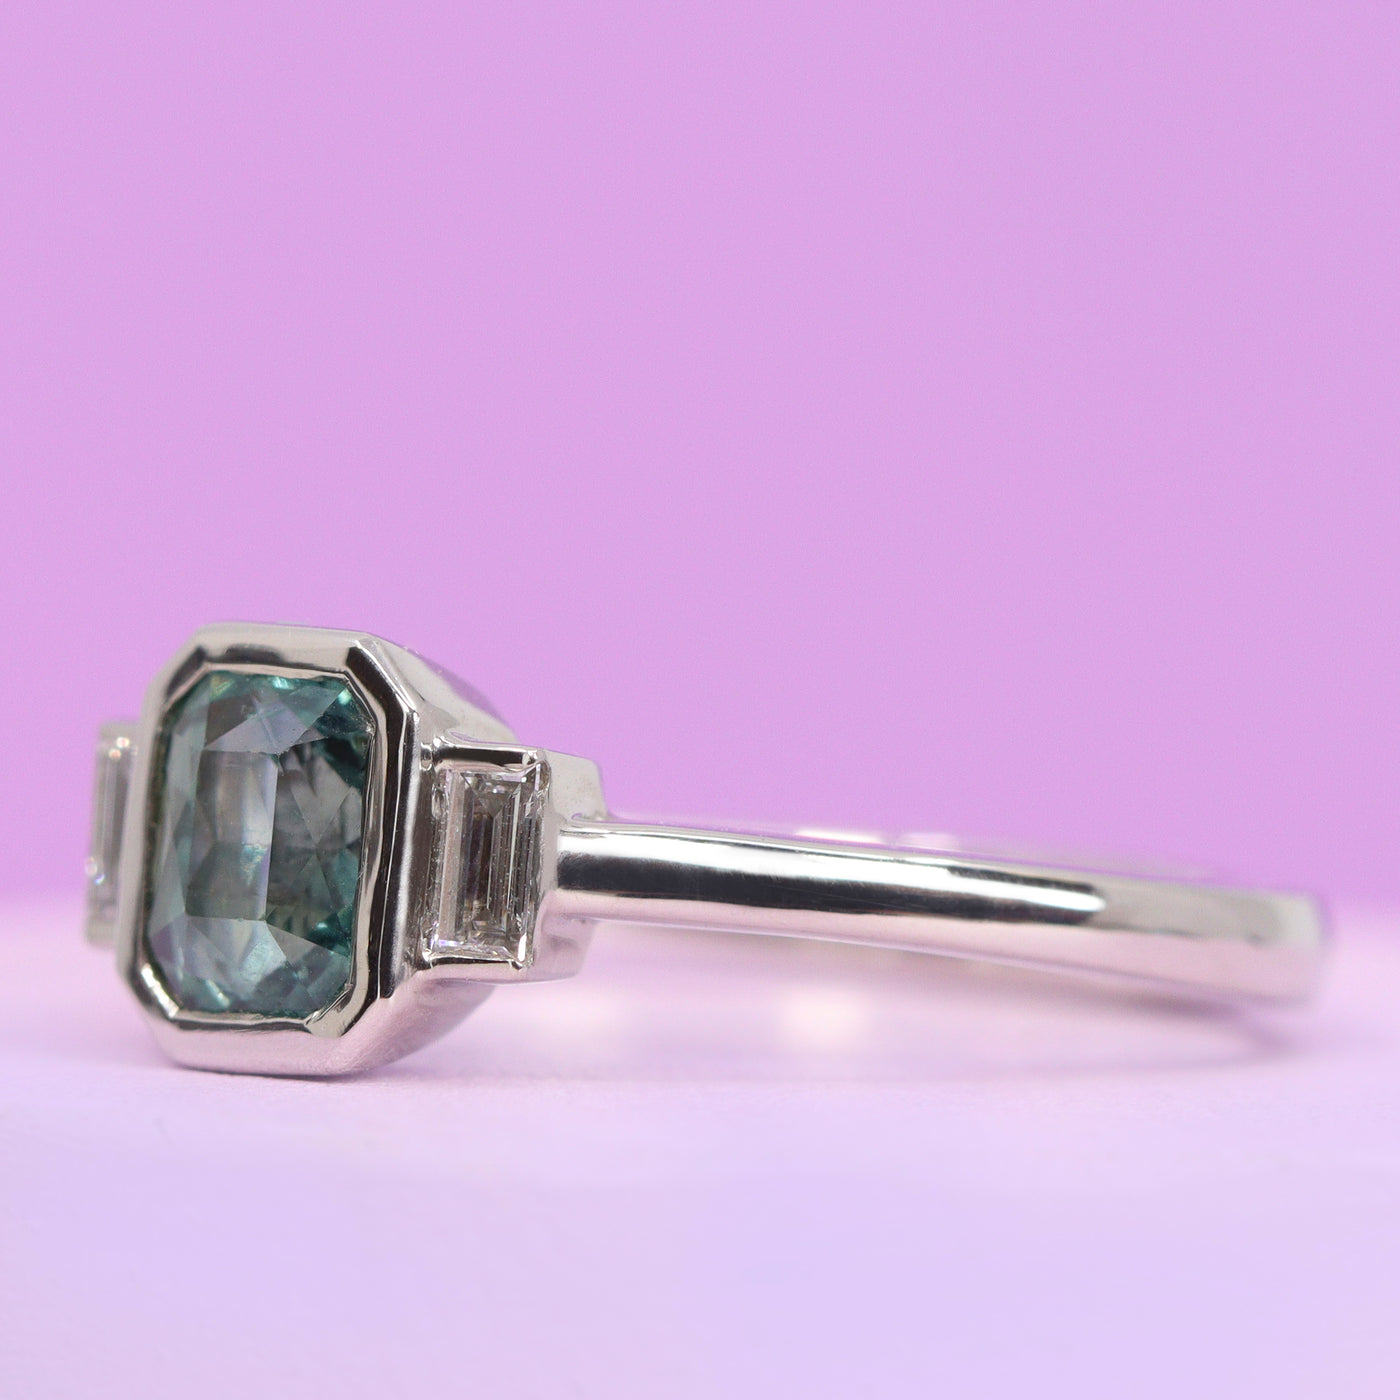 Phoebe - Radiant Cut Blue Teal Sapphire and Lab Grown Baguette Diamond Bezel Set Modern Art Deco Engagement Ring in Platinum - Ready-to-Wear